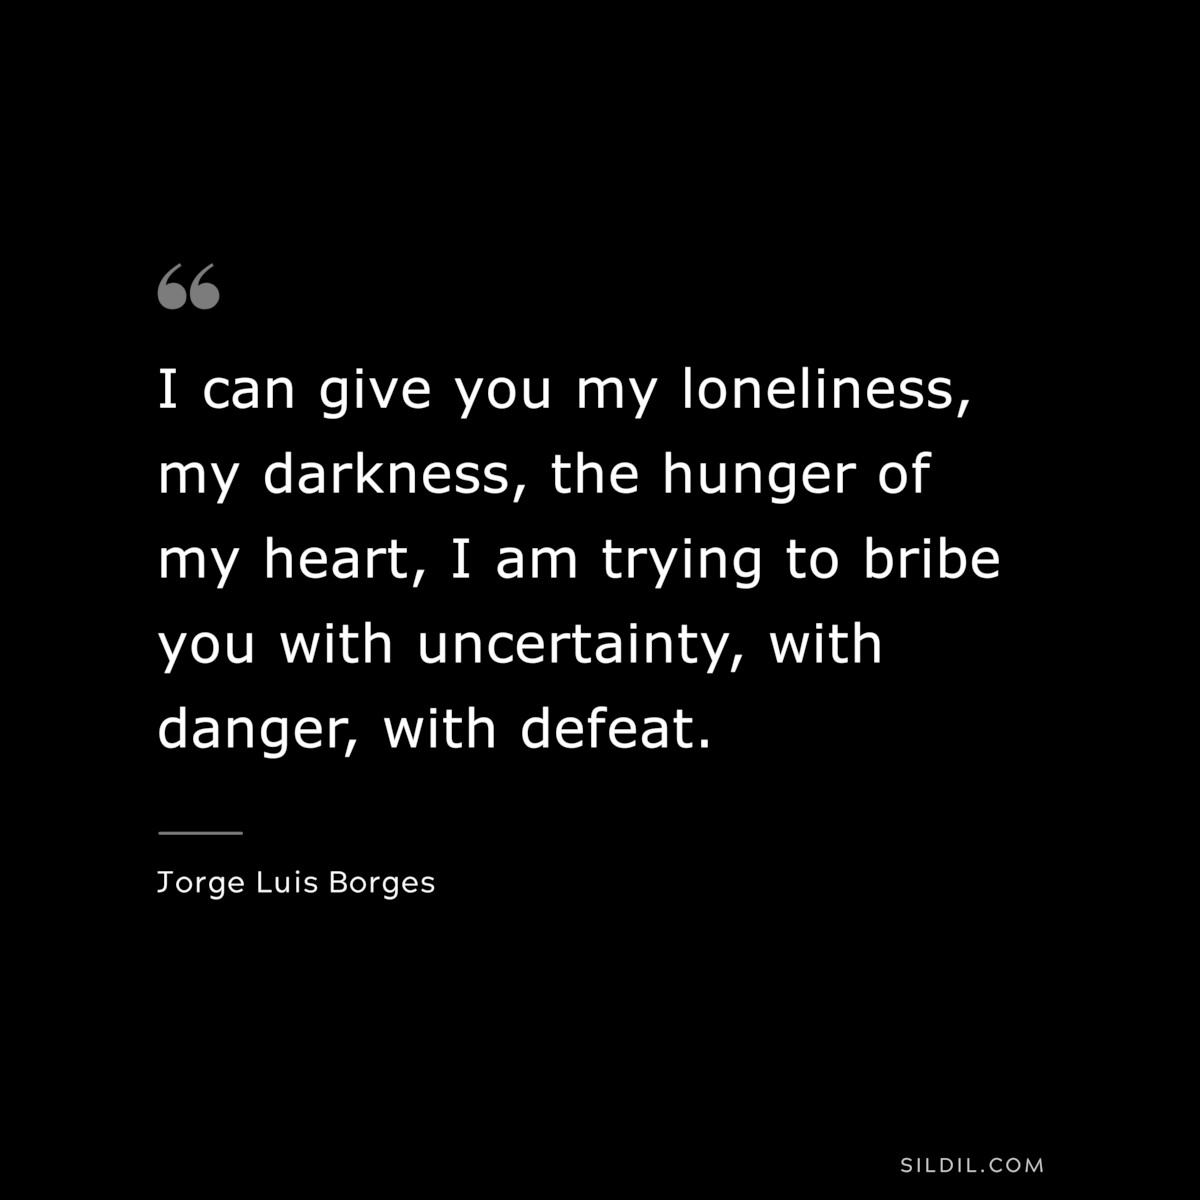 I can give you my loneliness, my darkness, the hunger of my heart, I am trying to bribe you with uncertainty, with danger, with defeat. ― Jorge Luis Borges